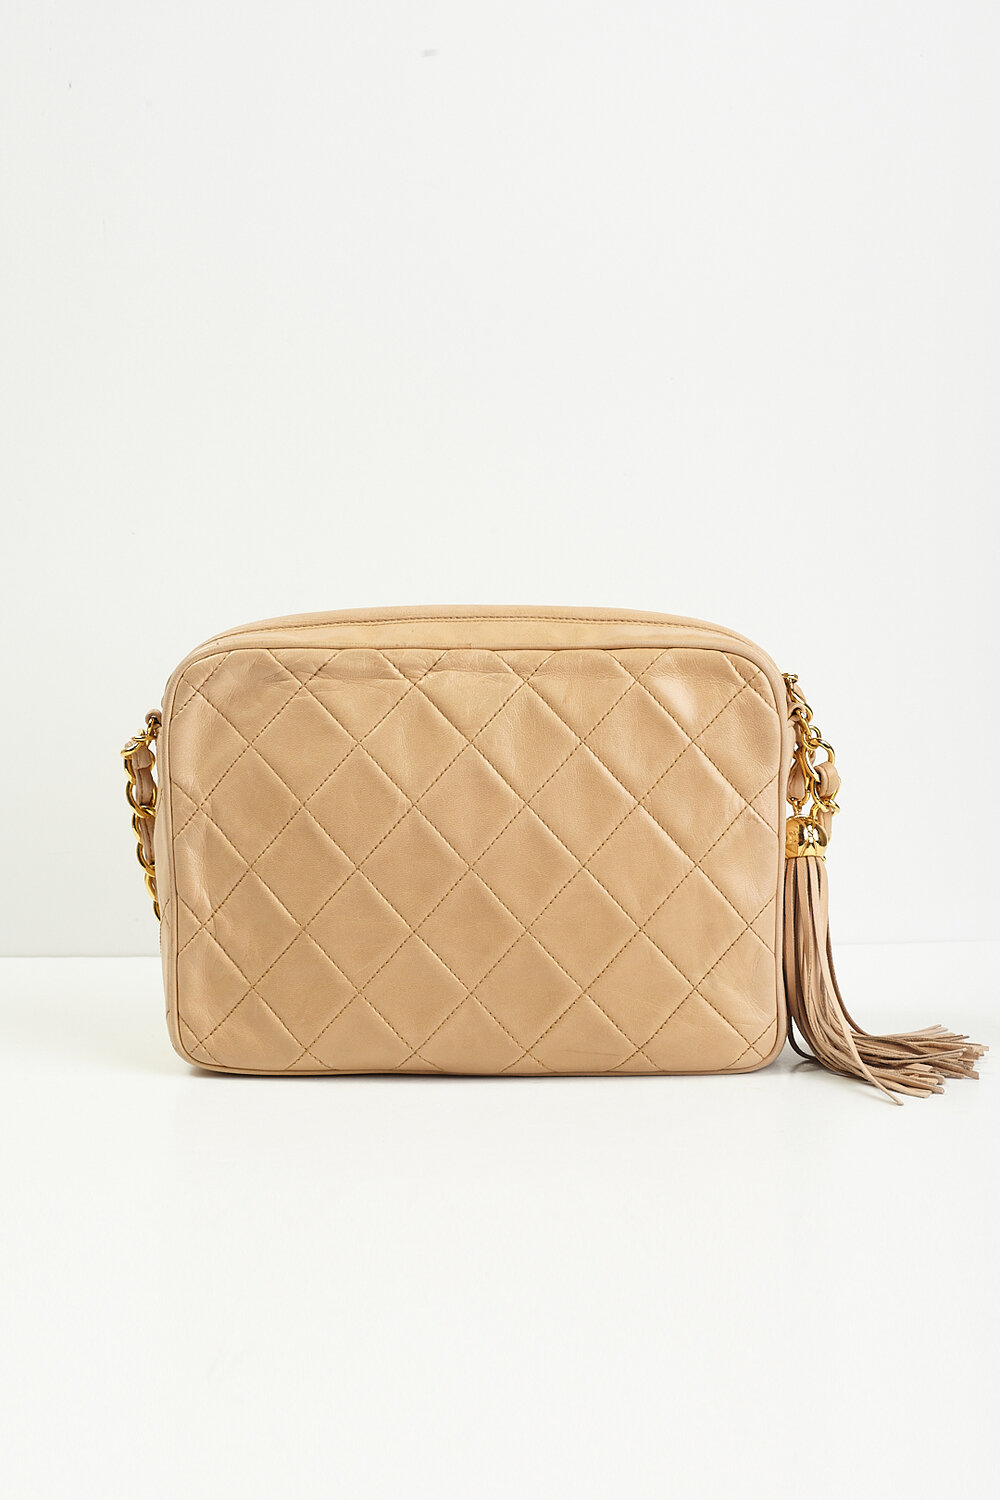 Chanel Matresse 1994-1996 Beige Quilted Flap · INTO